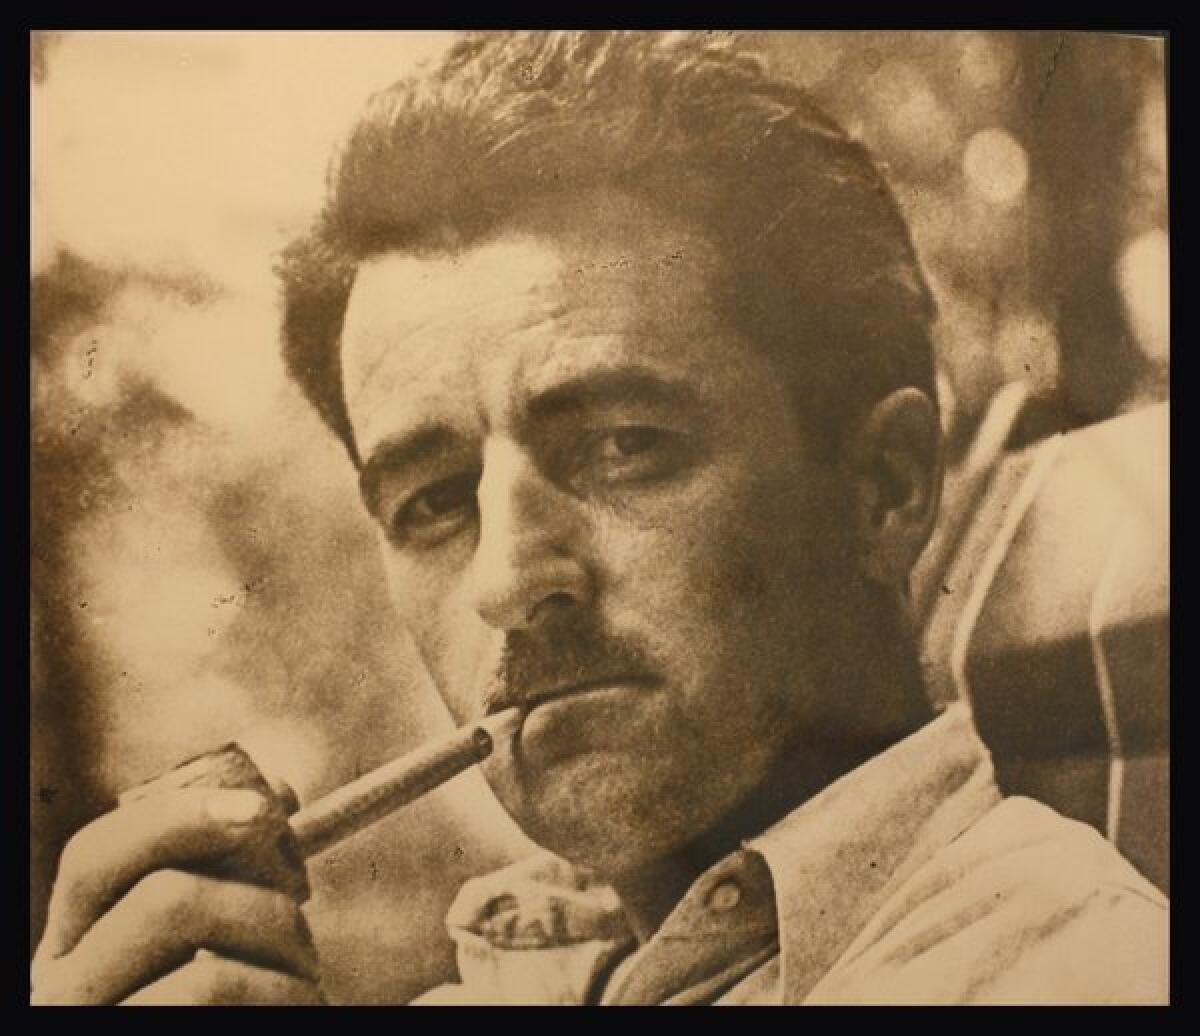 A photograph of William Faulkner on display at Rowan Oak, his home in Oxford, Miss.